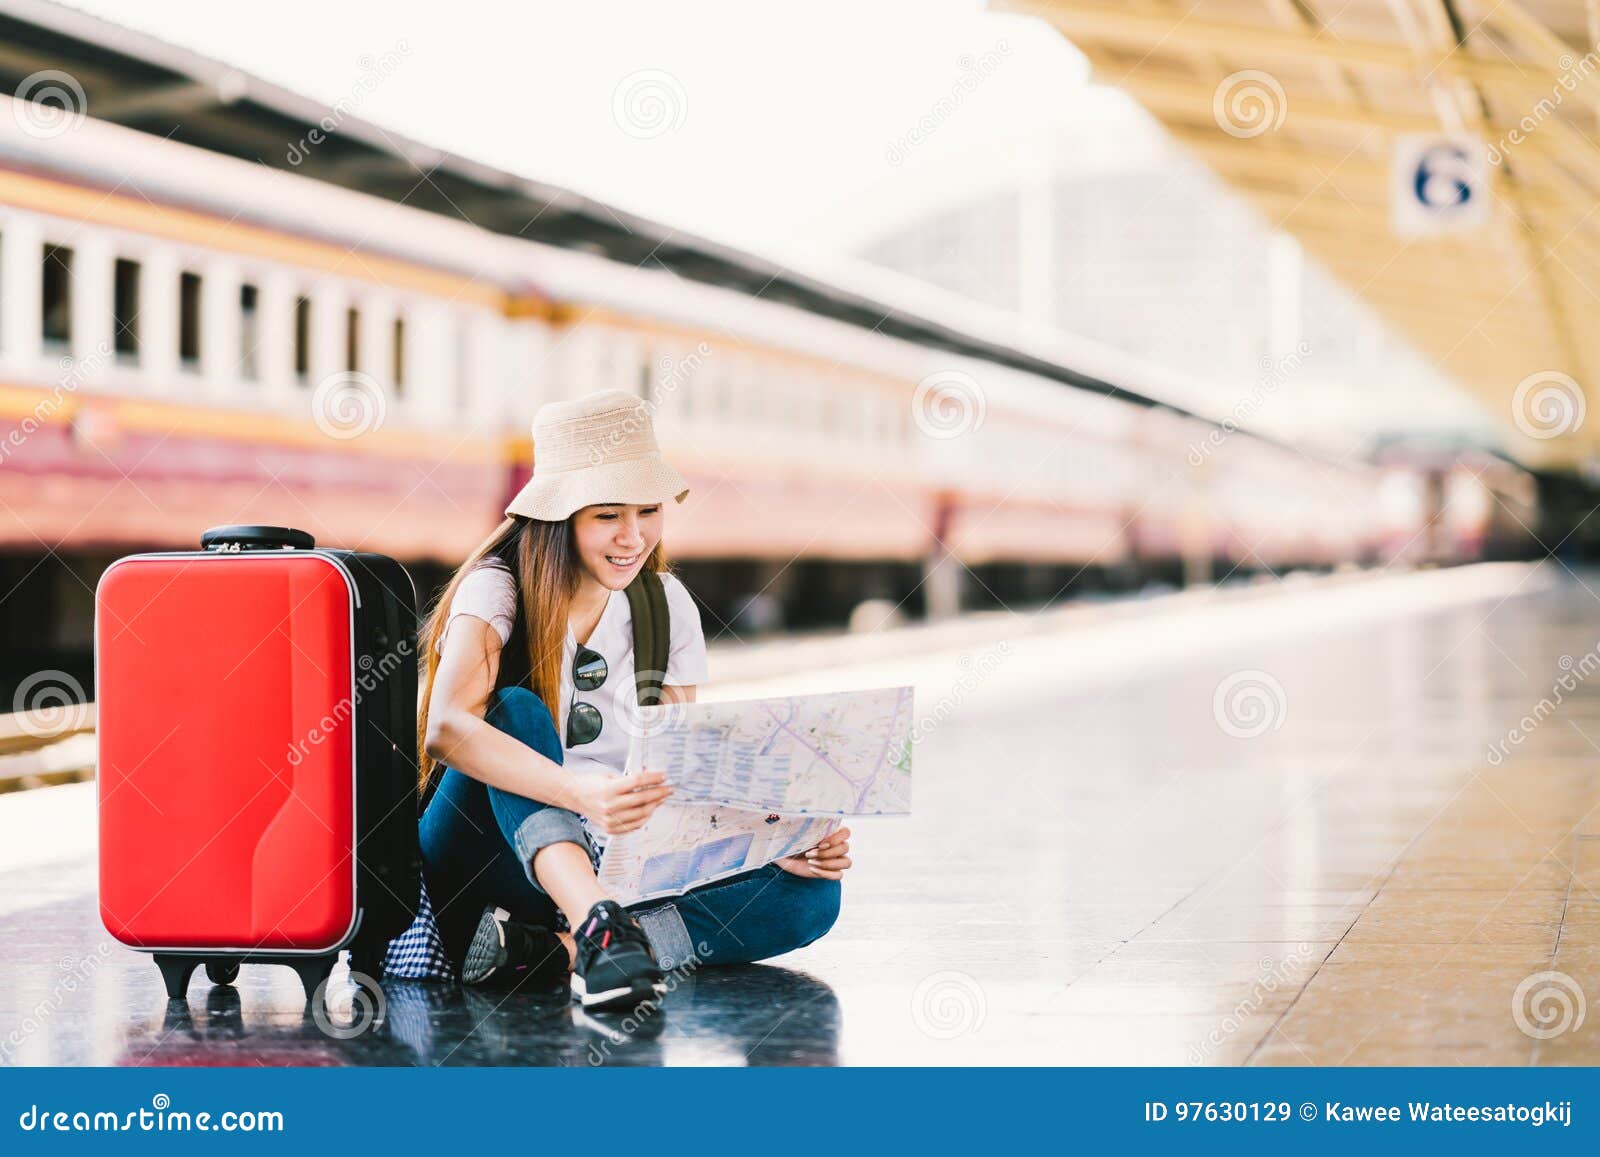 asian backpack traveler woman using generic local map, siting alone at train station platform with luggage